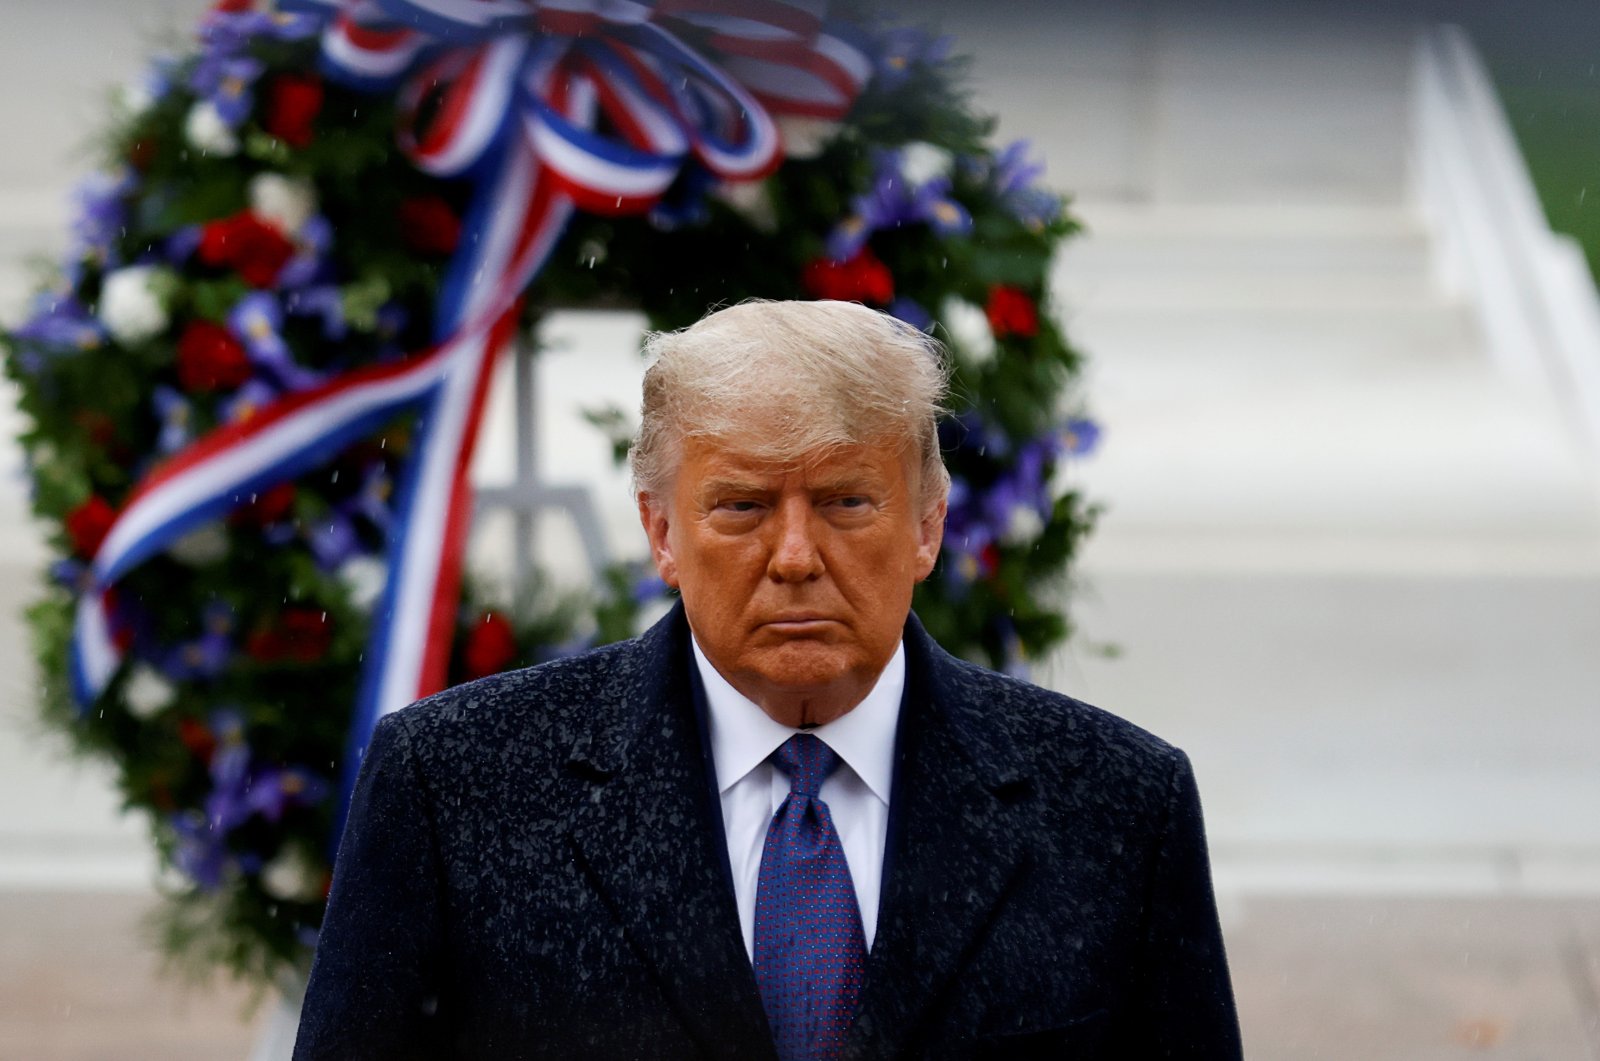 U.S. President Donald Trump turns after placing a wreath at the Tomb of the Unknown Soldier as he attends a Veterans Day observance in the rain at Arlington National Cemetery in Arlington, Virginia, U.S., Nov. 11, 2020. (Reuters Photo)